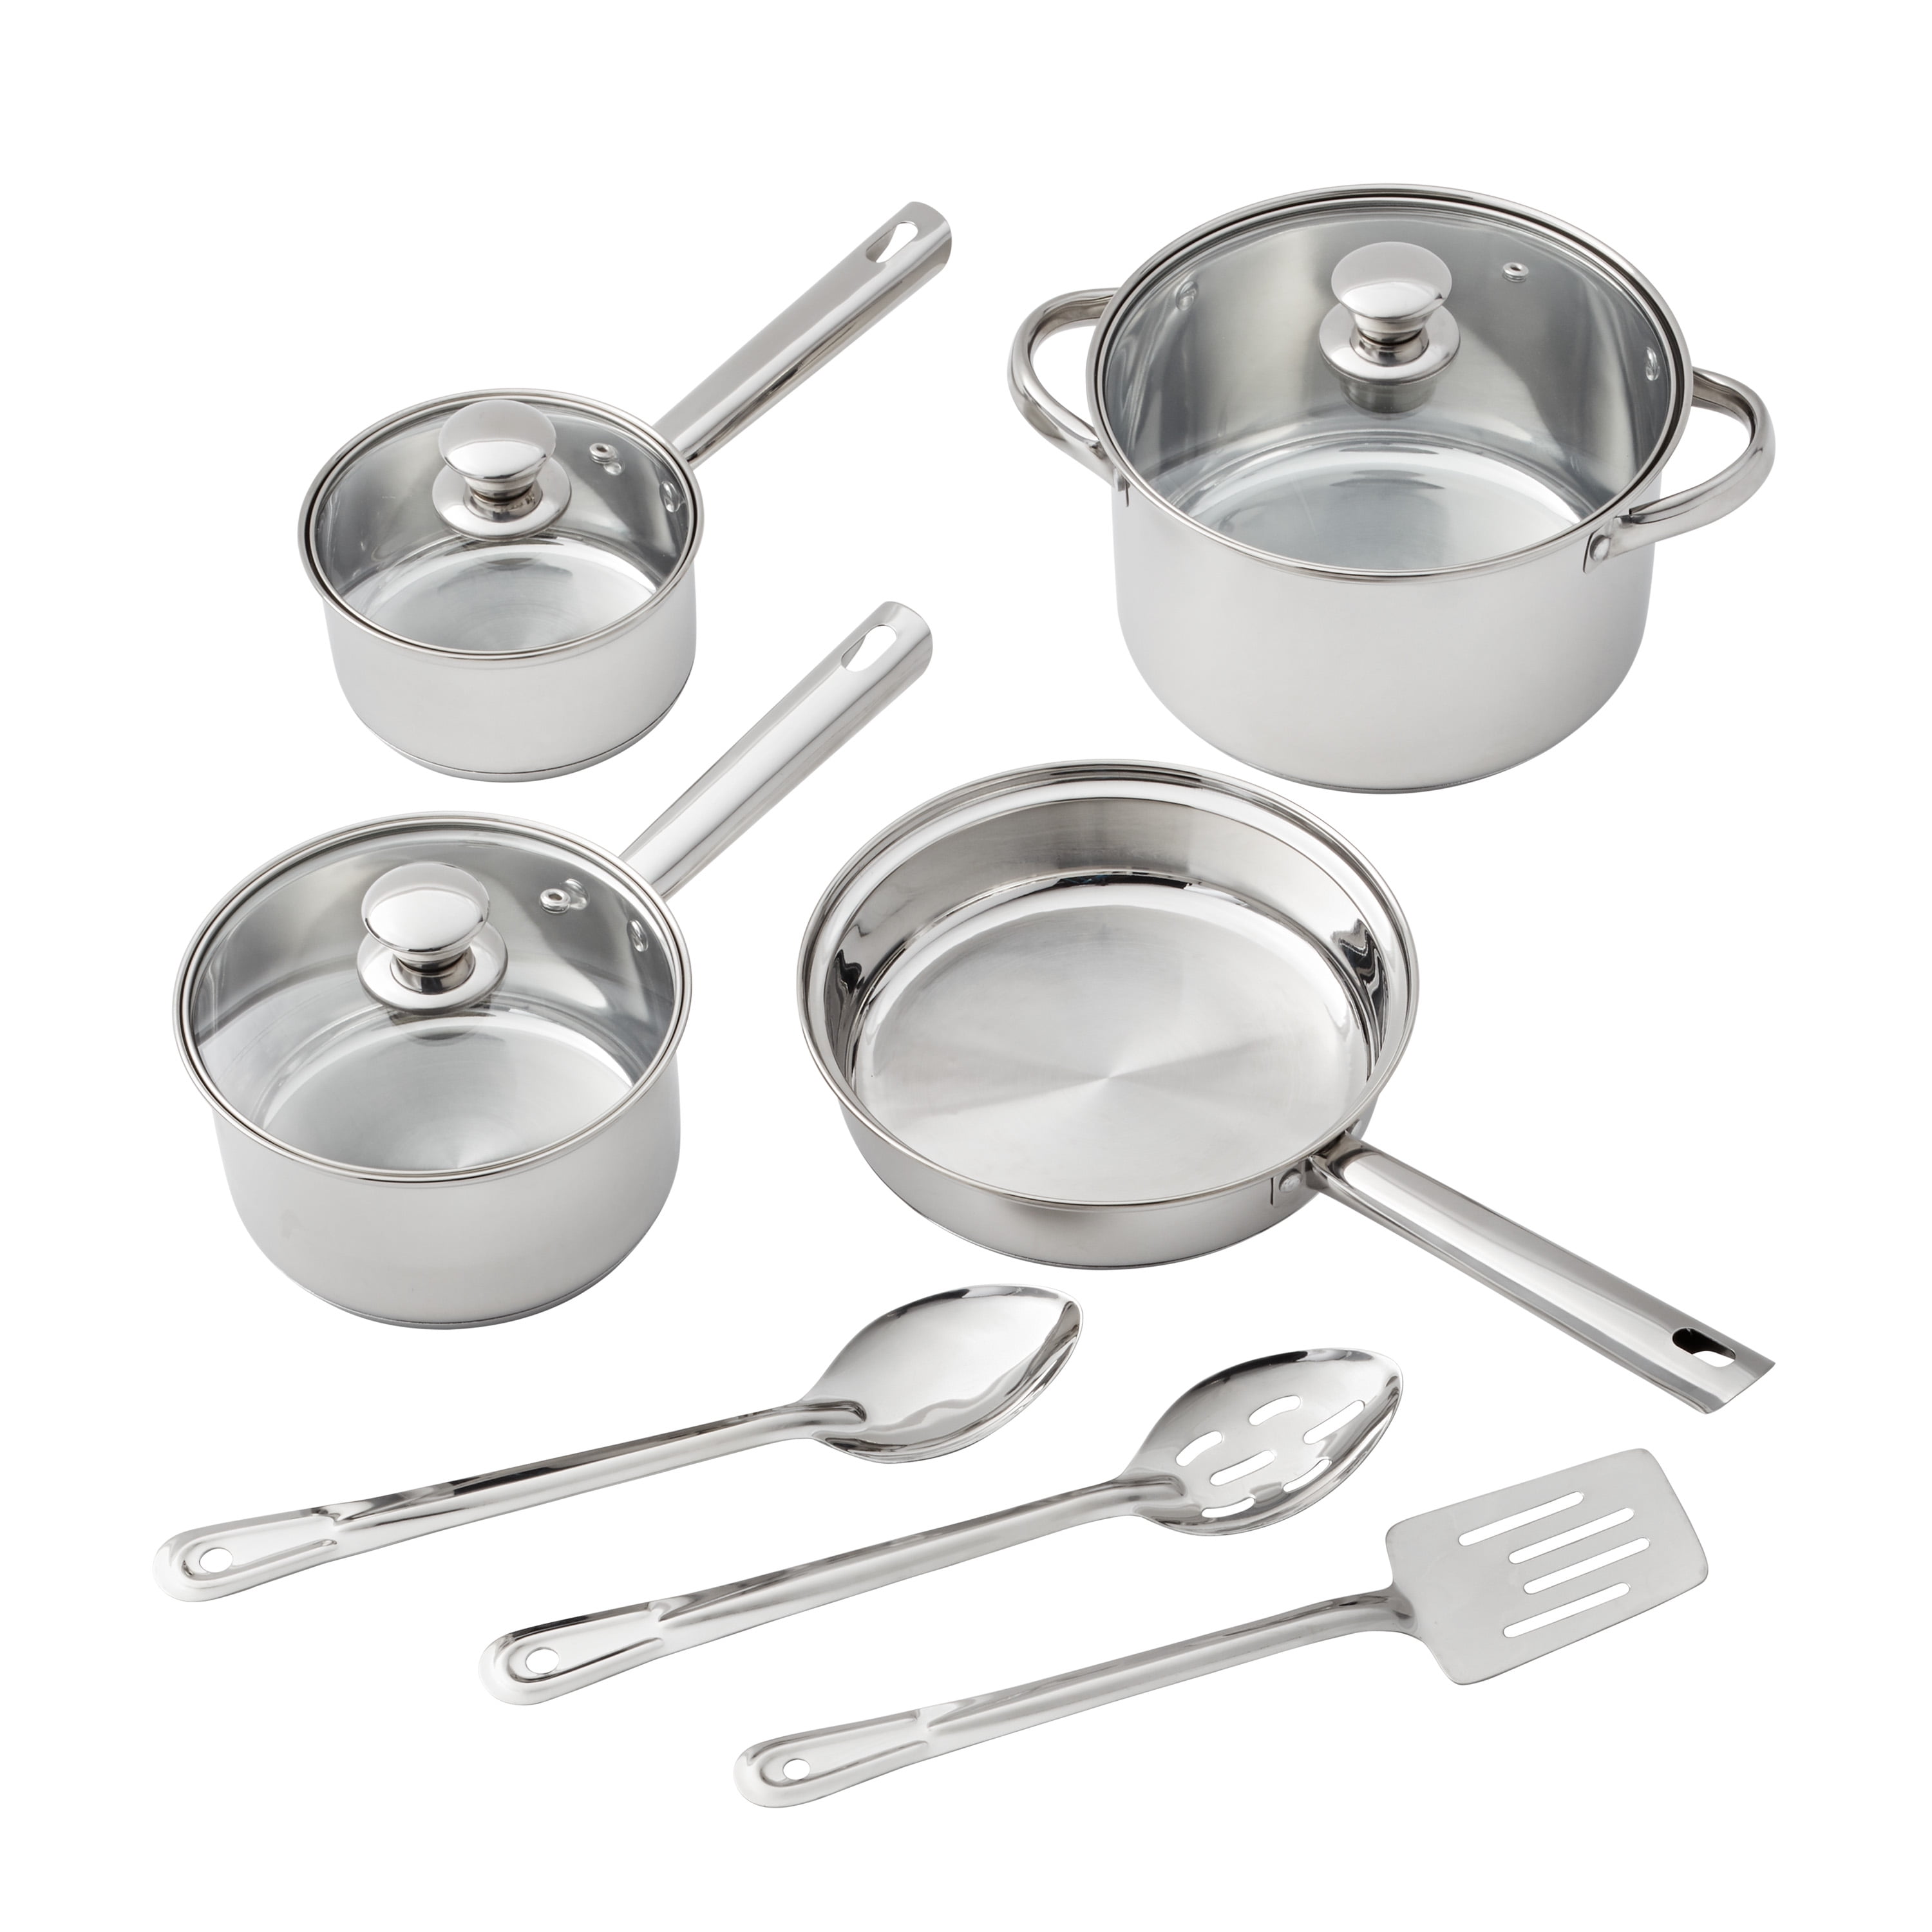 Cookware Set Stainless Steel Kitchen Tools Pots Pans Bowls 10 Pieces NEW 